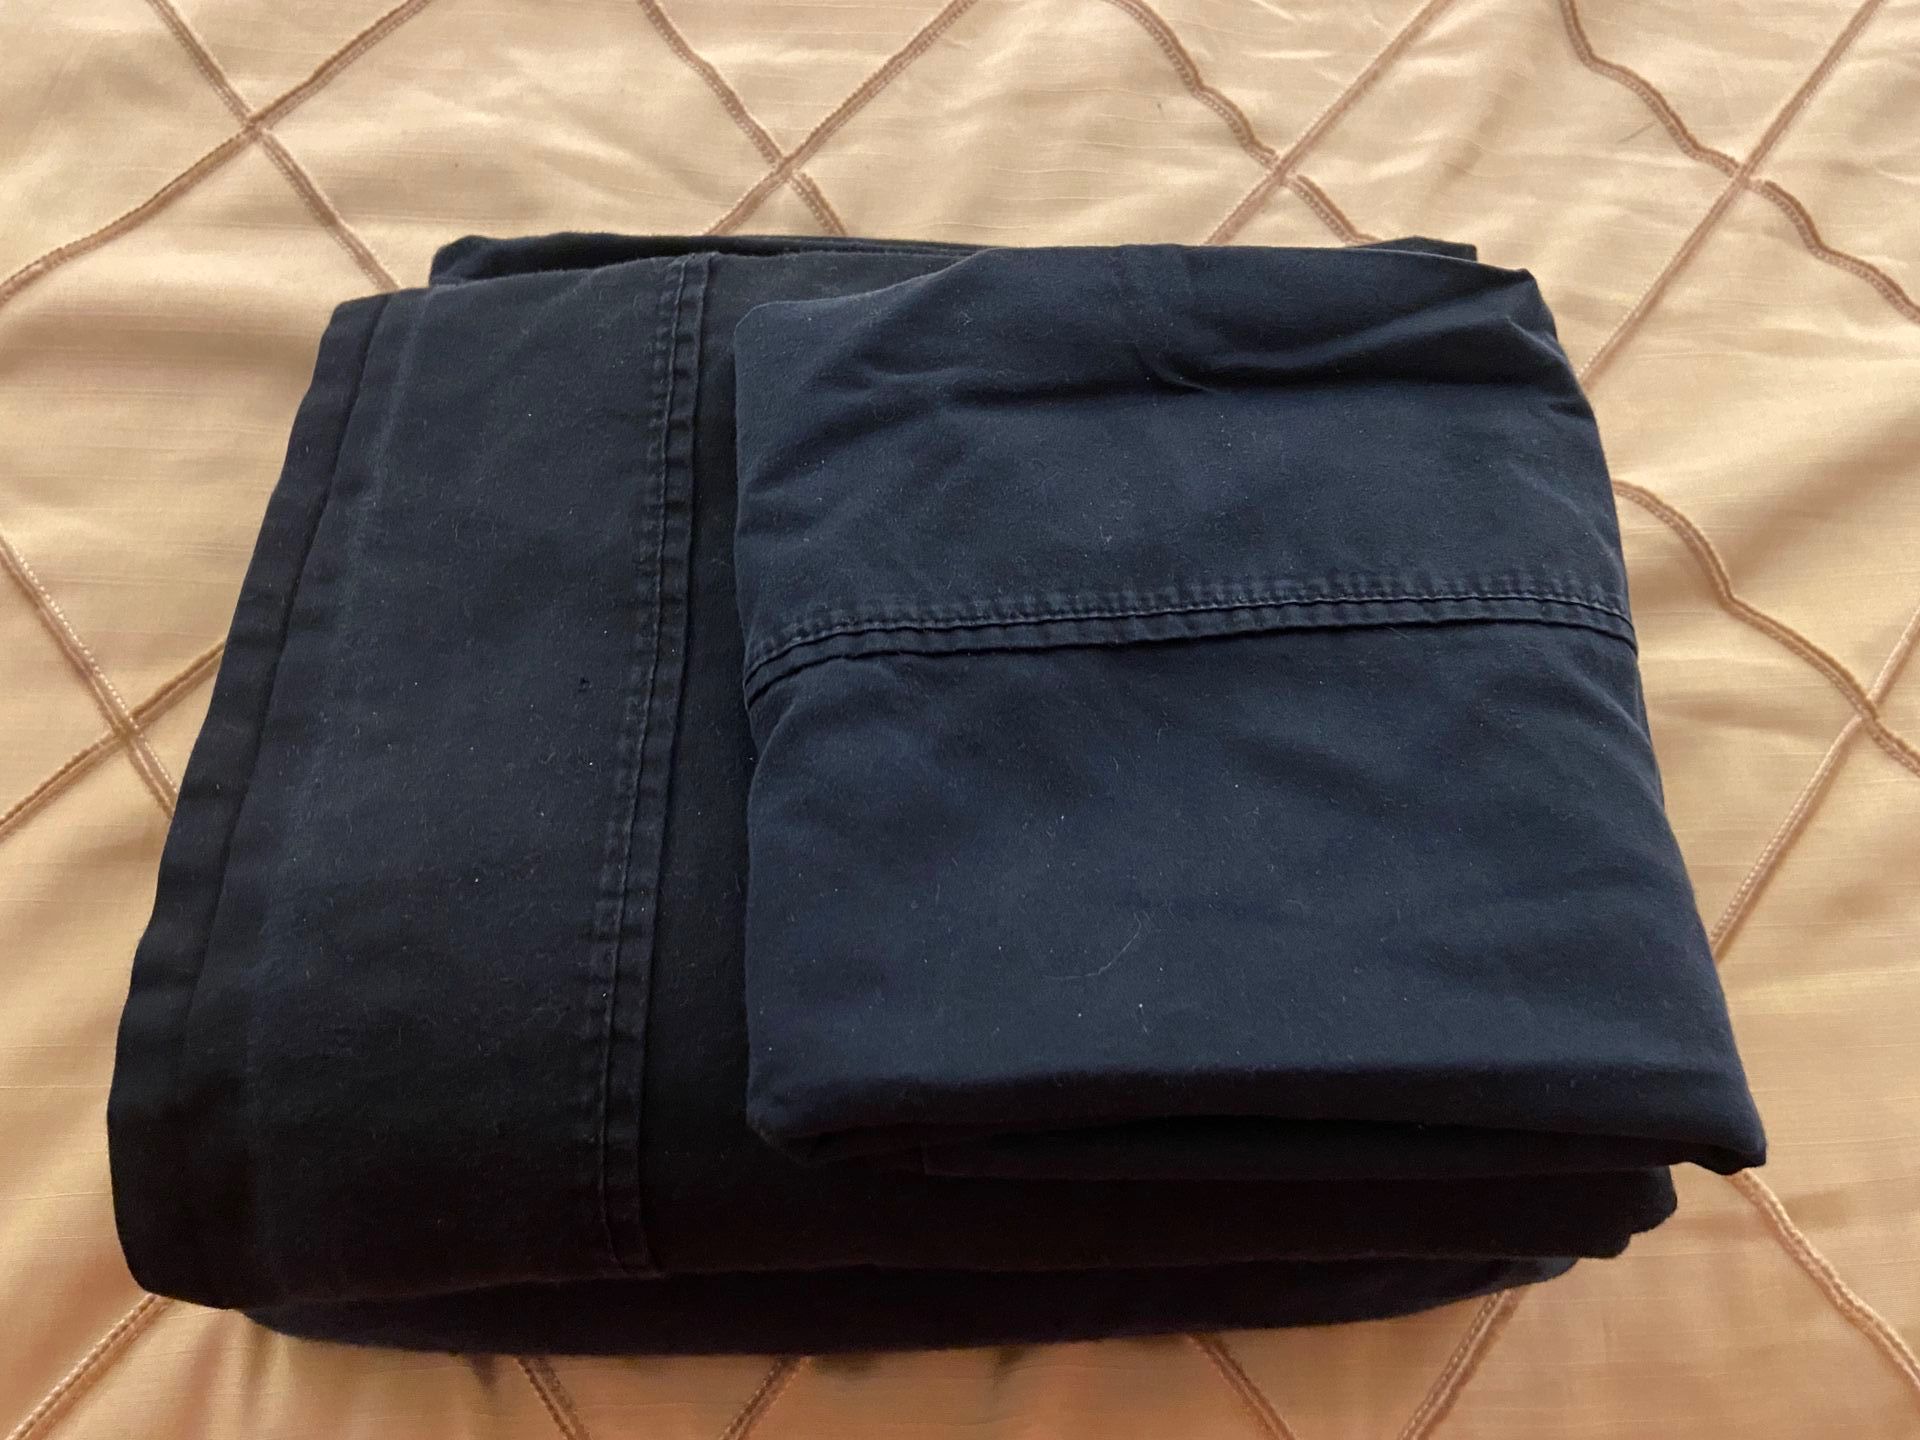 Full Black Sheet Set  - Used In good Condition. 